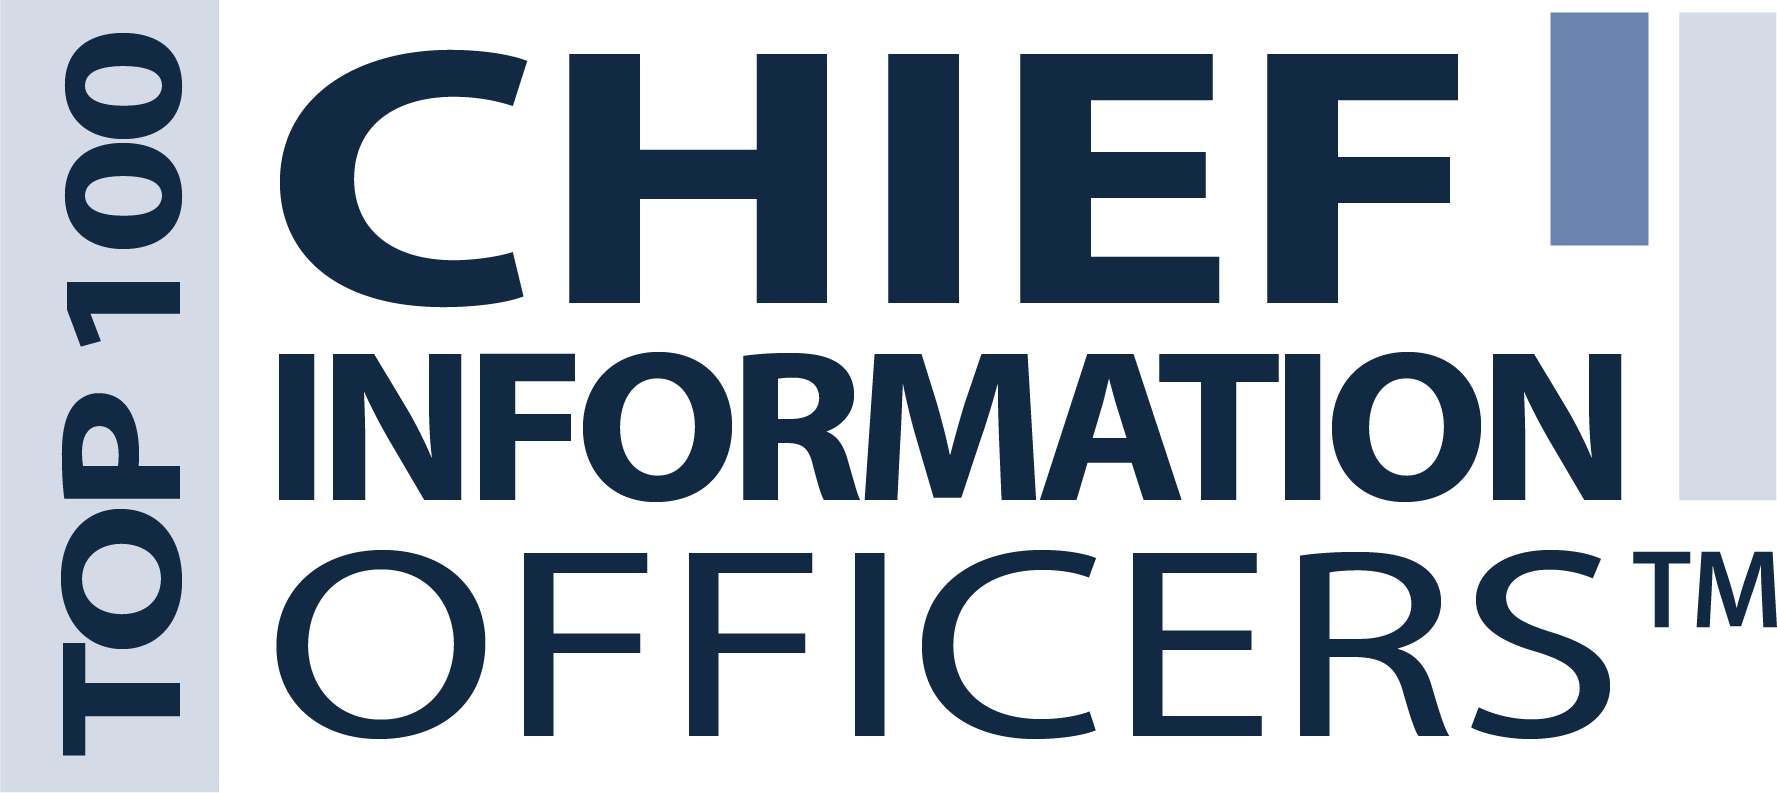 Top 100 Chief Information Officers